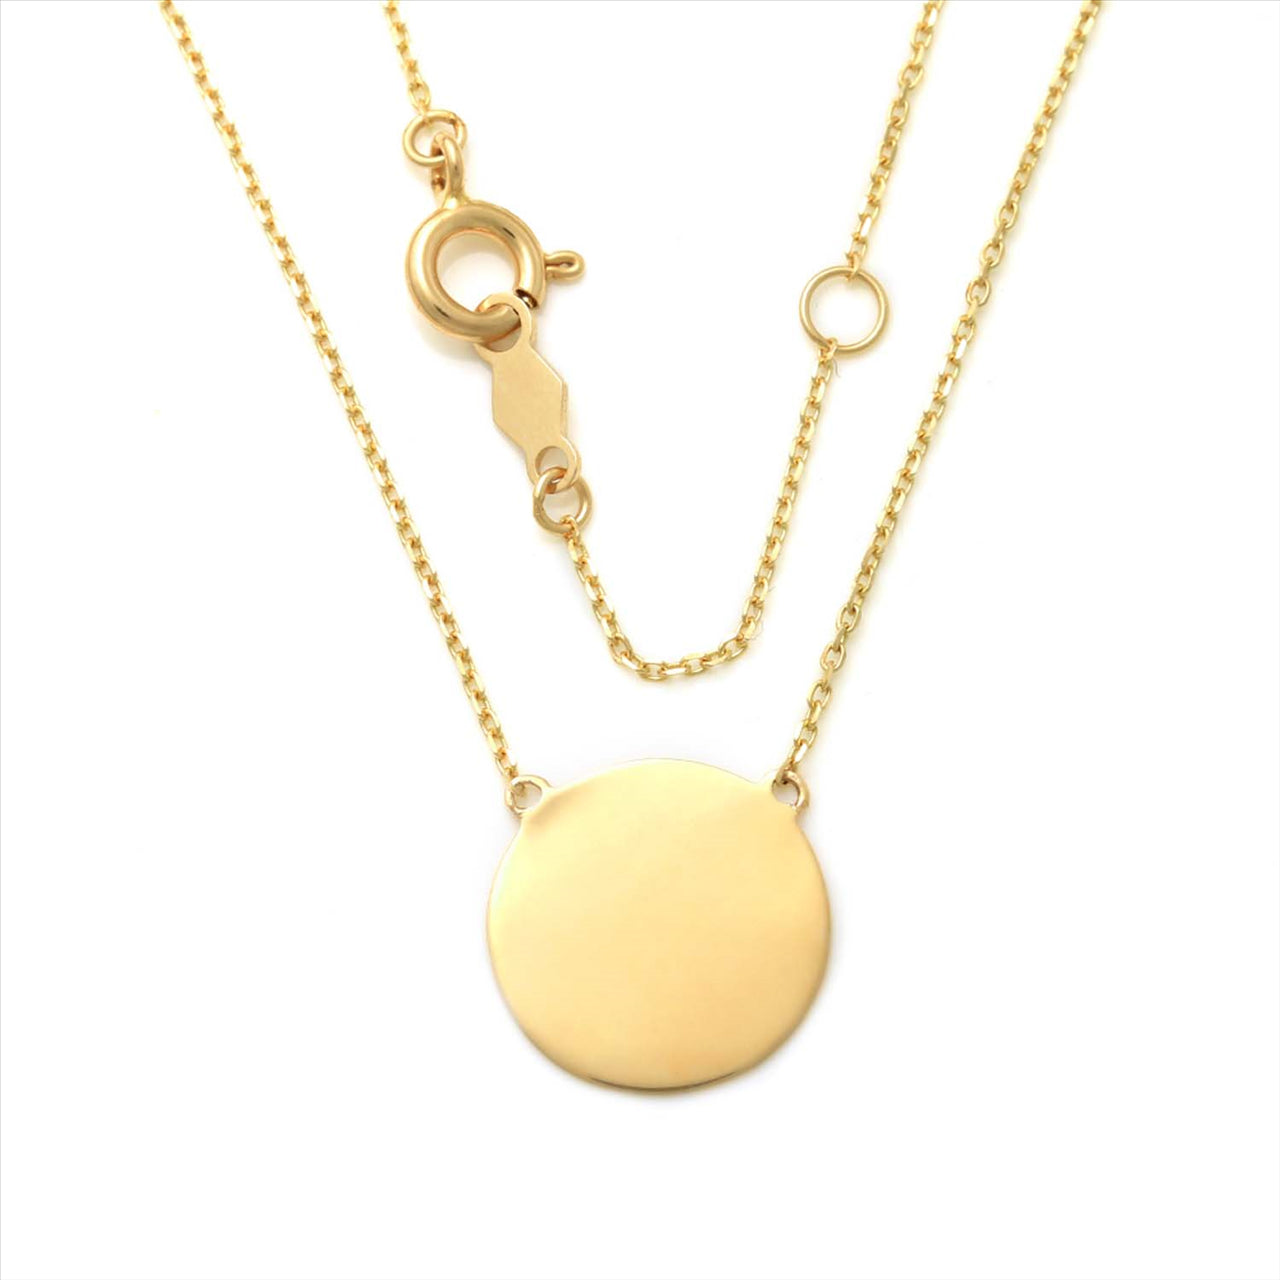 9ct Y/G 11mm Circle Plate Pendant with Chain